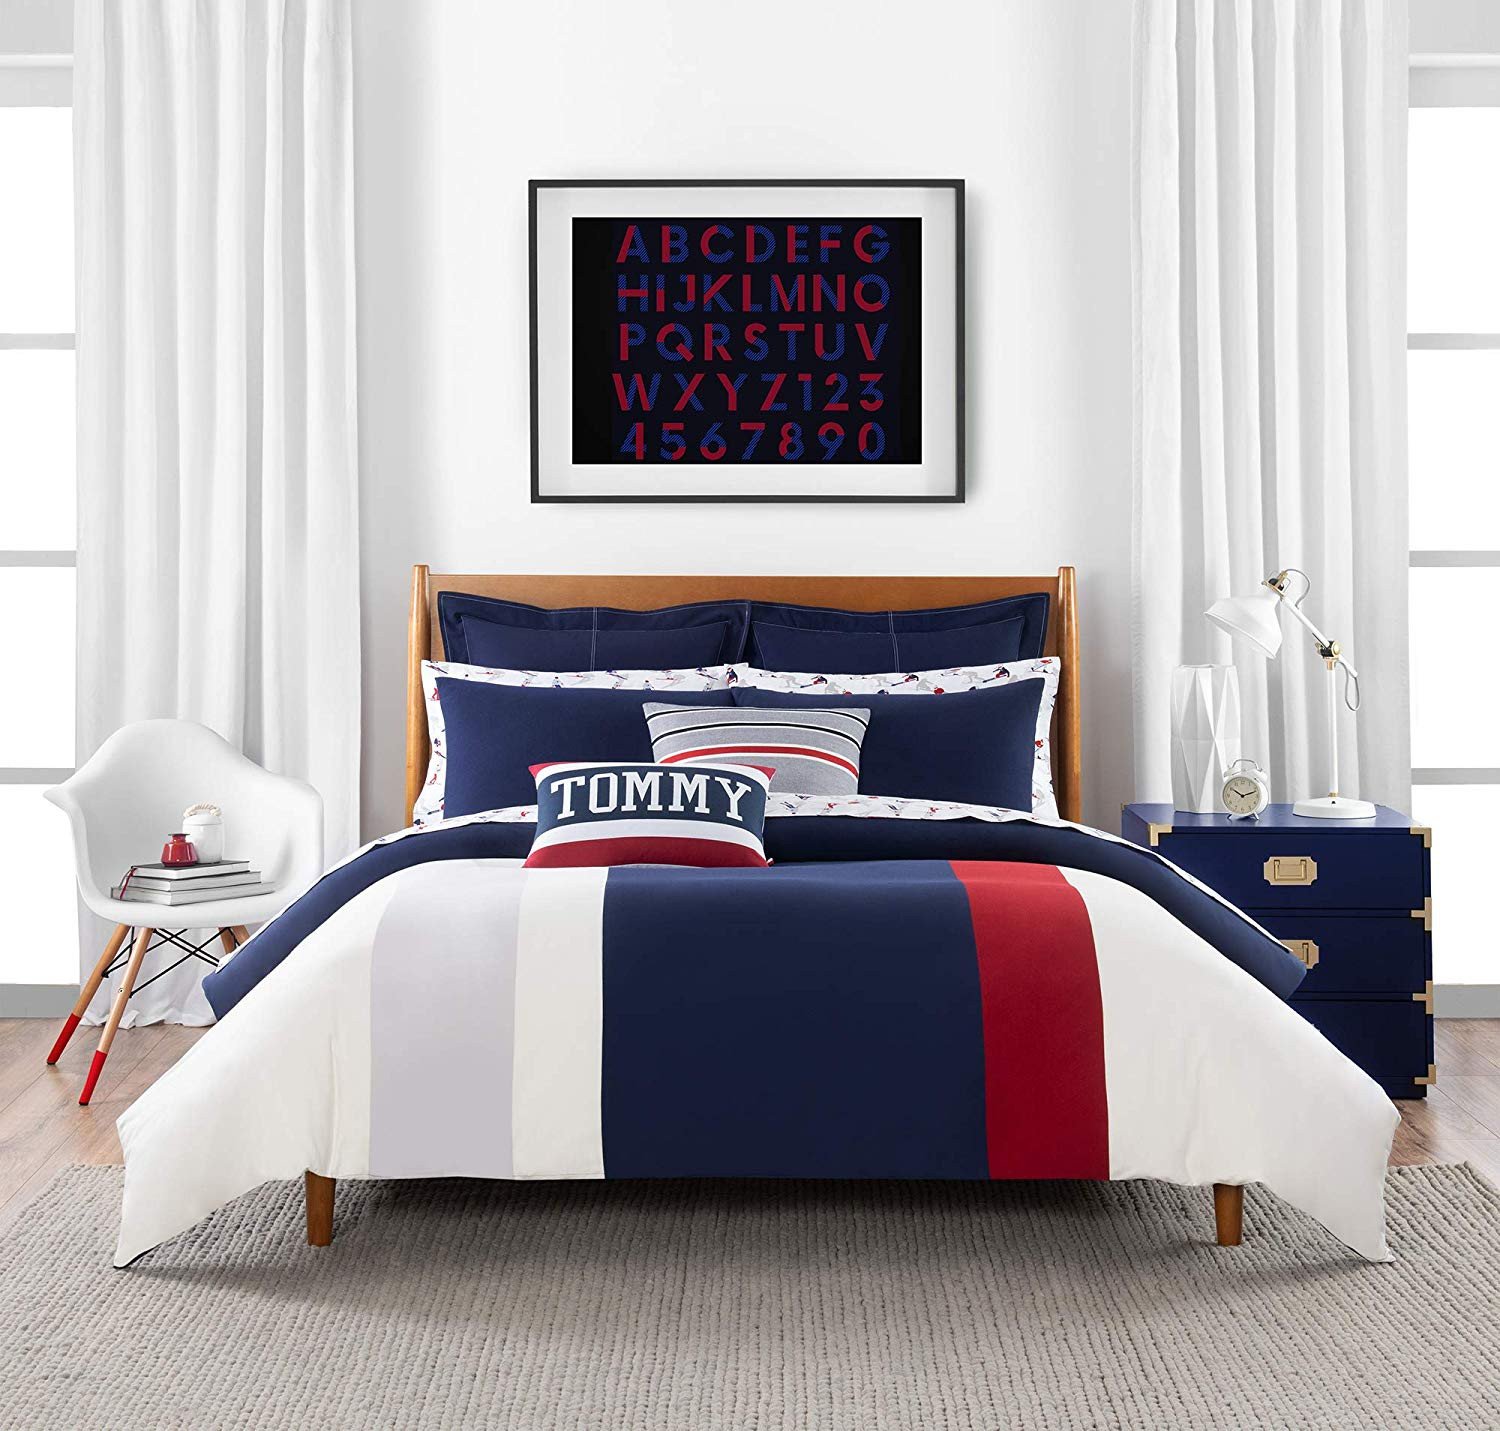 White Bedroom Set Queen Beautiful Amazon tommy Hilfiger Clash Of 85 Stripe Bedding